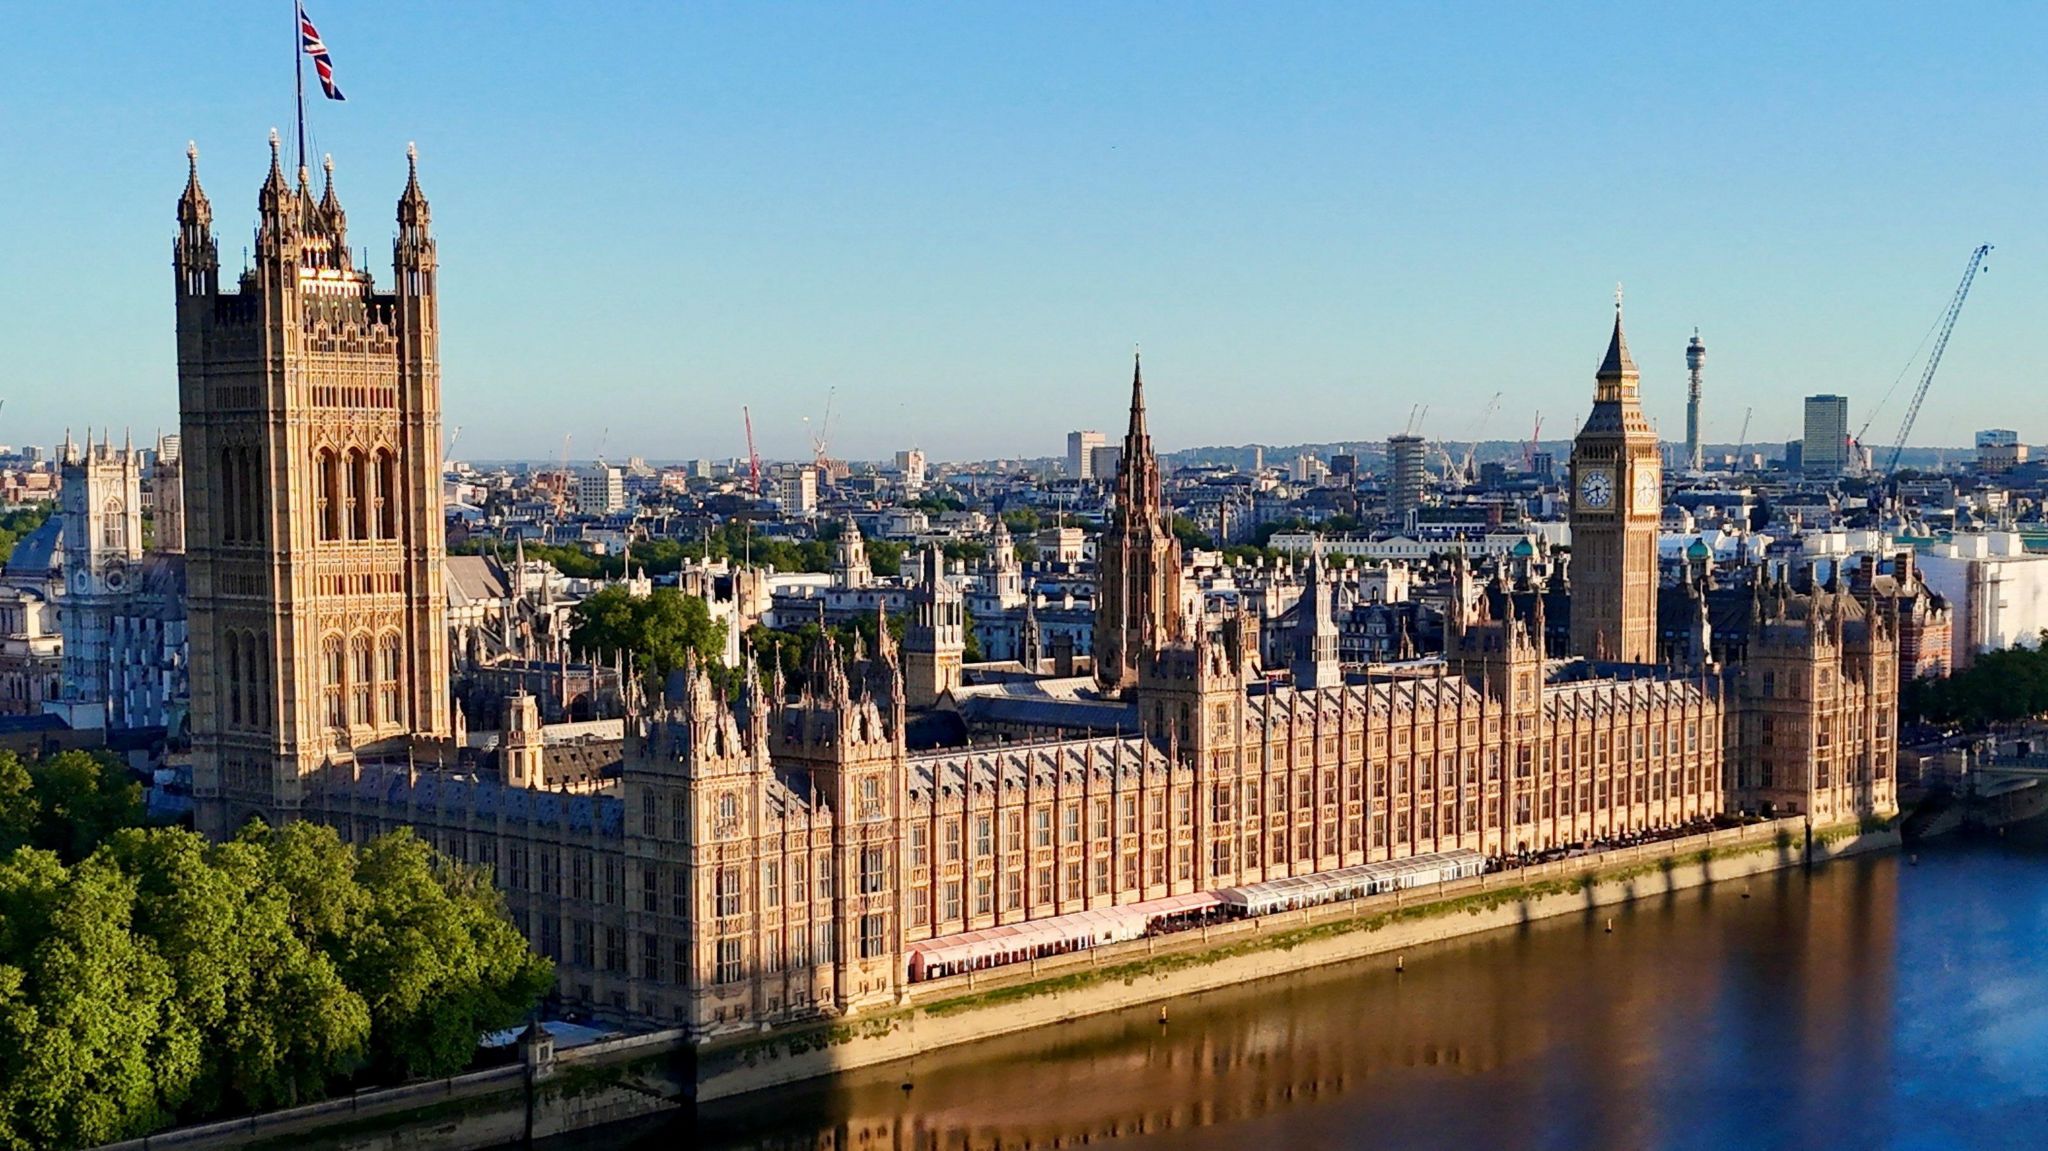 A drone view of the Palace of Westminster which houses Britain's parliamentt